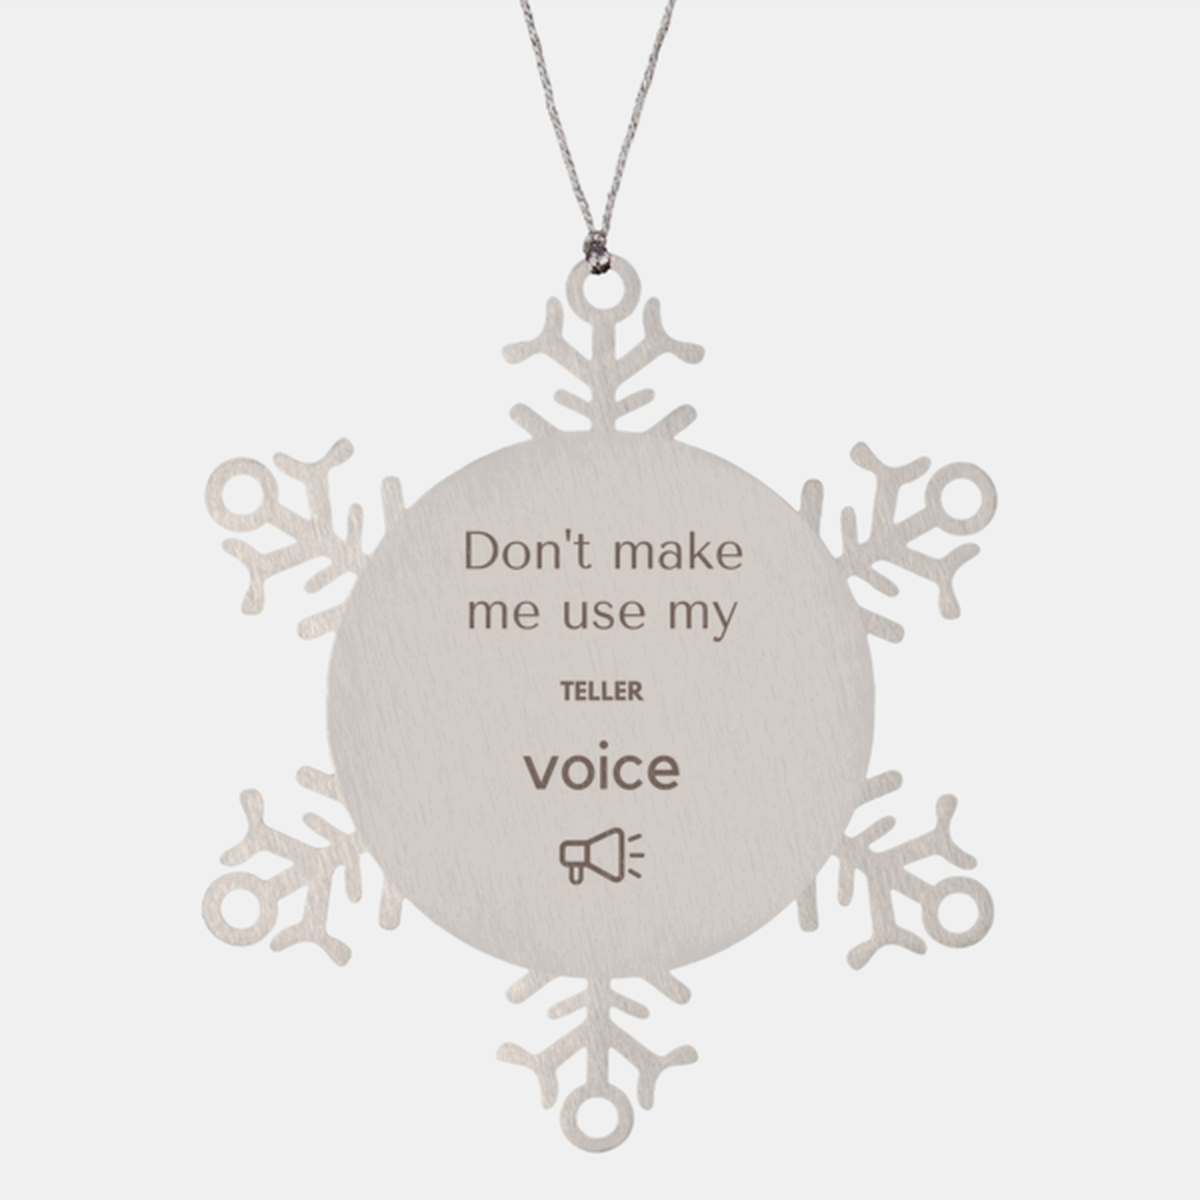 Don't make me use my Teller voice, Sarcasm Teller Ornament Gifts, Christmas Teller Snowflake Ornament Unique Gifts For Teller Coworkers, Men, Women, Colleague, Friends